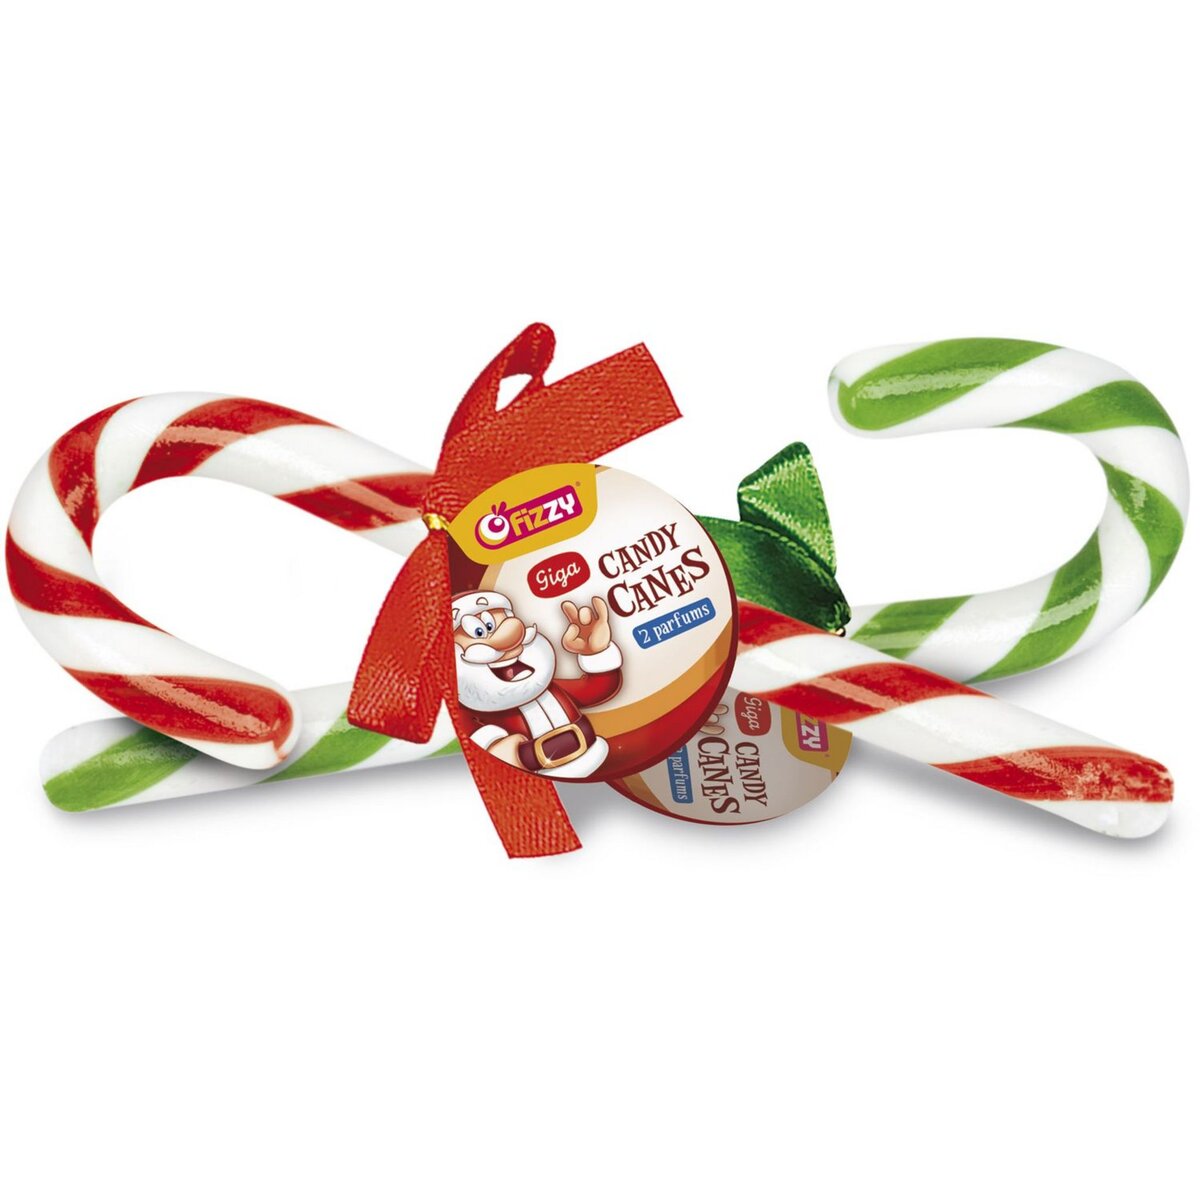 FIZZY Fizzy giga candy canes 50g